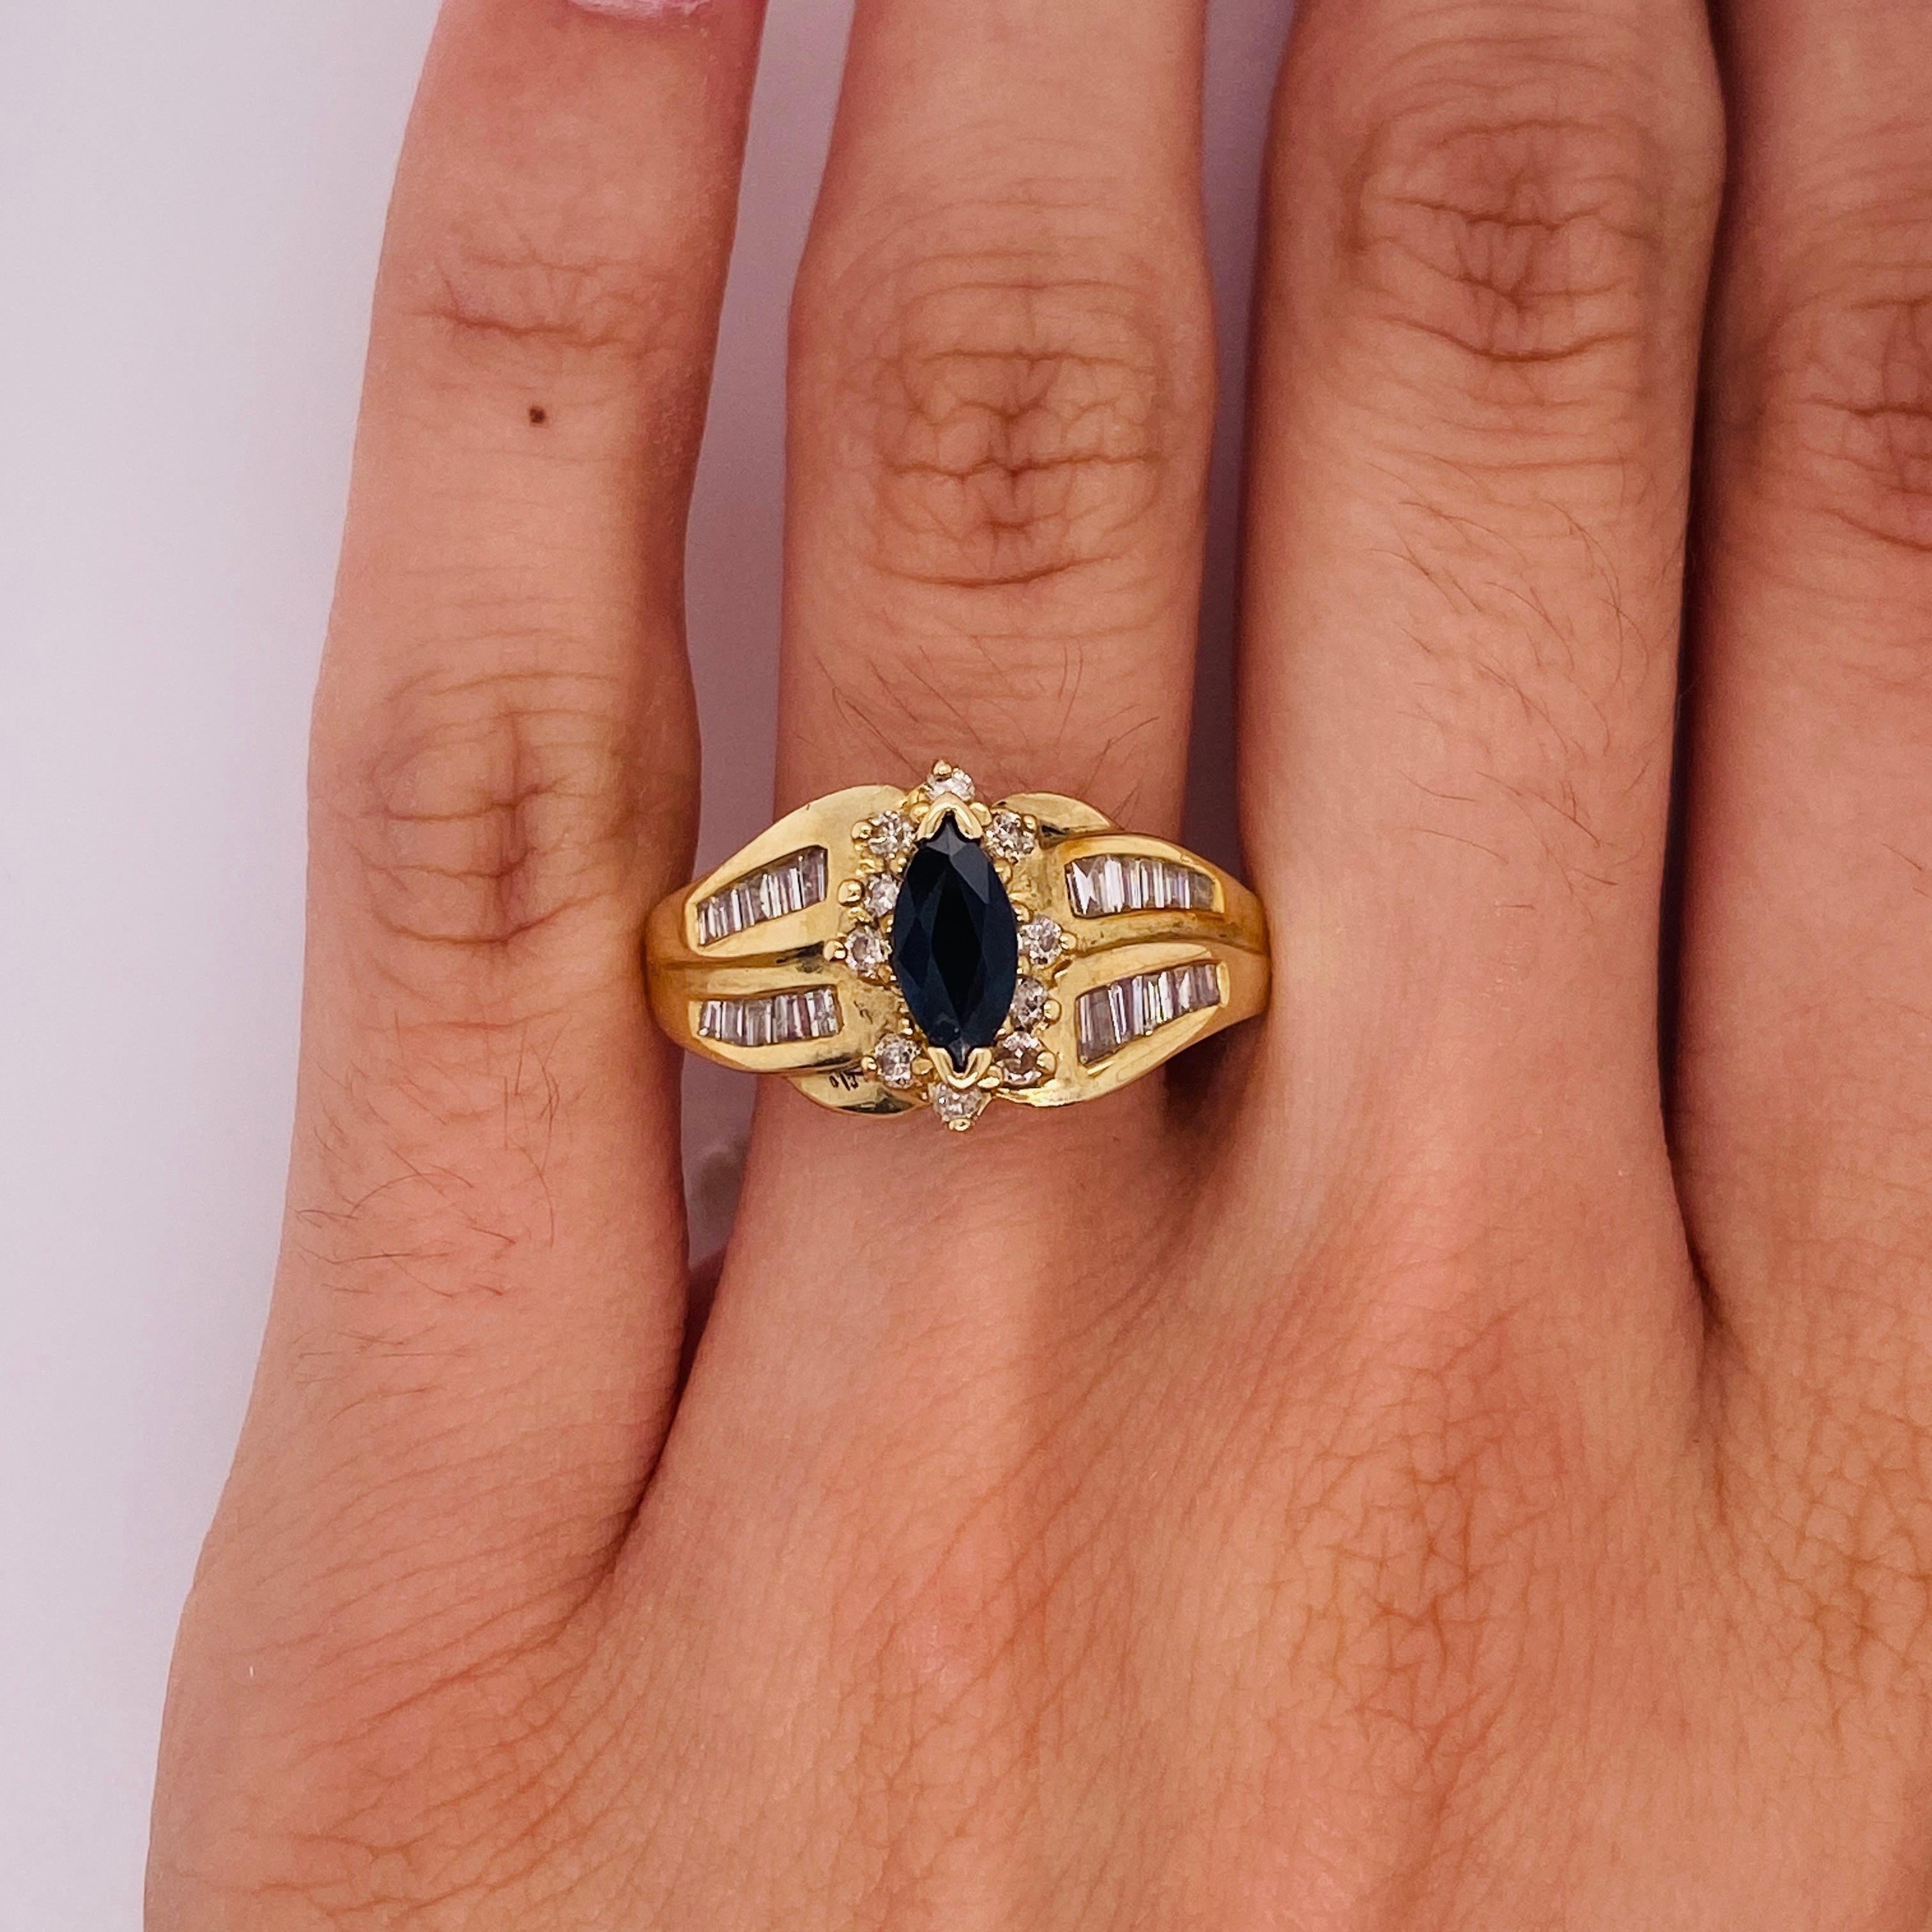 This wonderfully preserved estate sapphire and diamond ring would be a fabulous gift to your September loved one celebrating a graduation, anniversary, birthday, or important milestone! The marquise shape stone creates a rich centerpiece for a